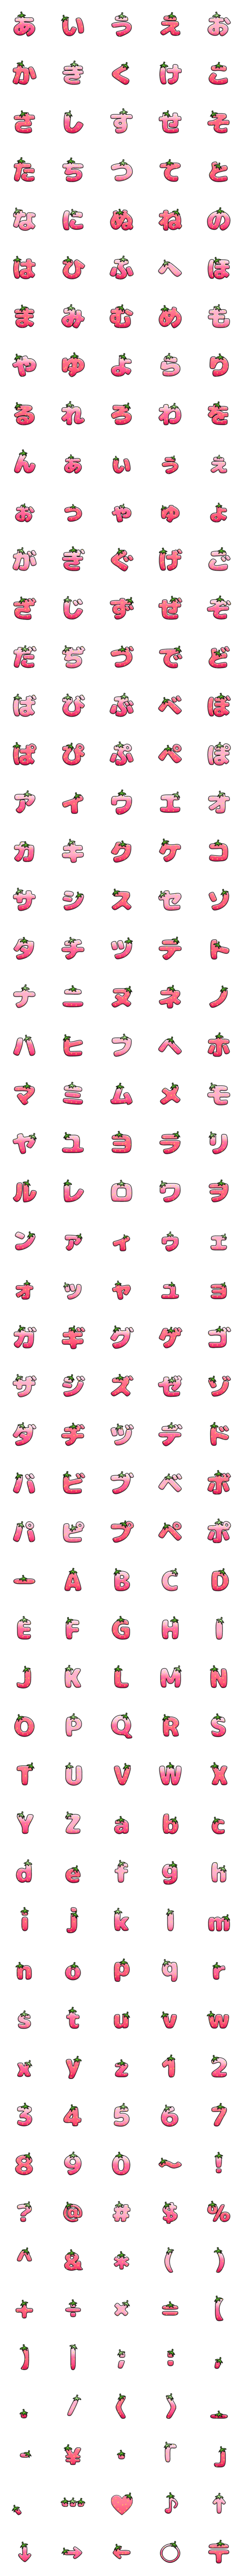 [LINE絵文字]いちご 絵文字 デコ文字 苺 イチゴの画像一覧